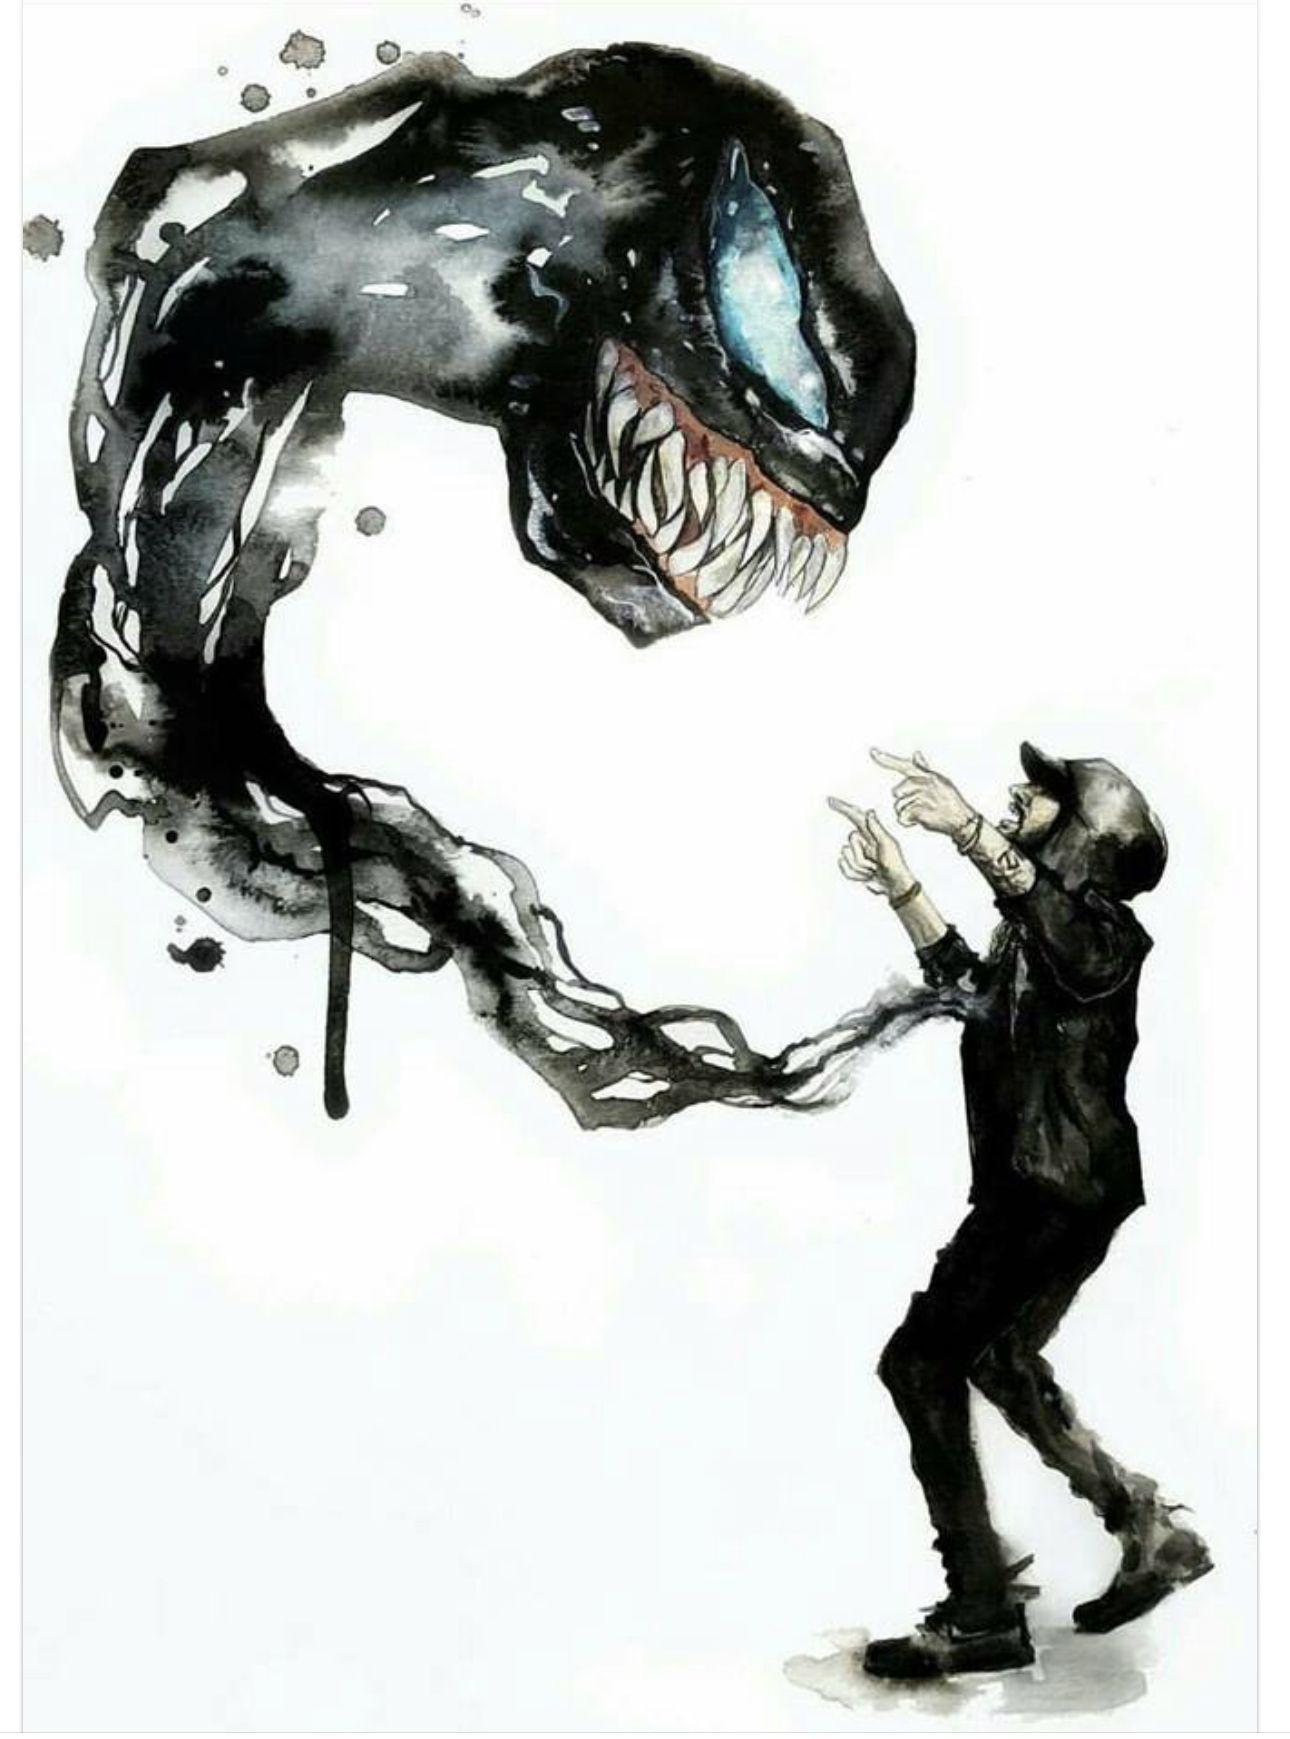 The music video for venom from Eminem was so awesome, so this